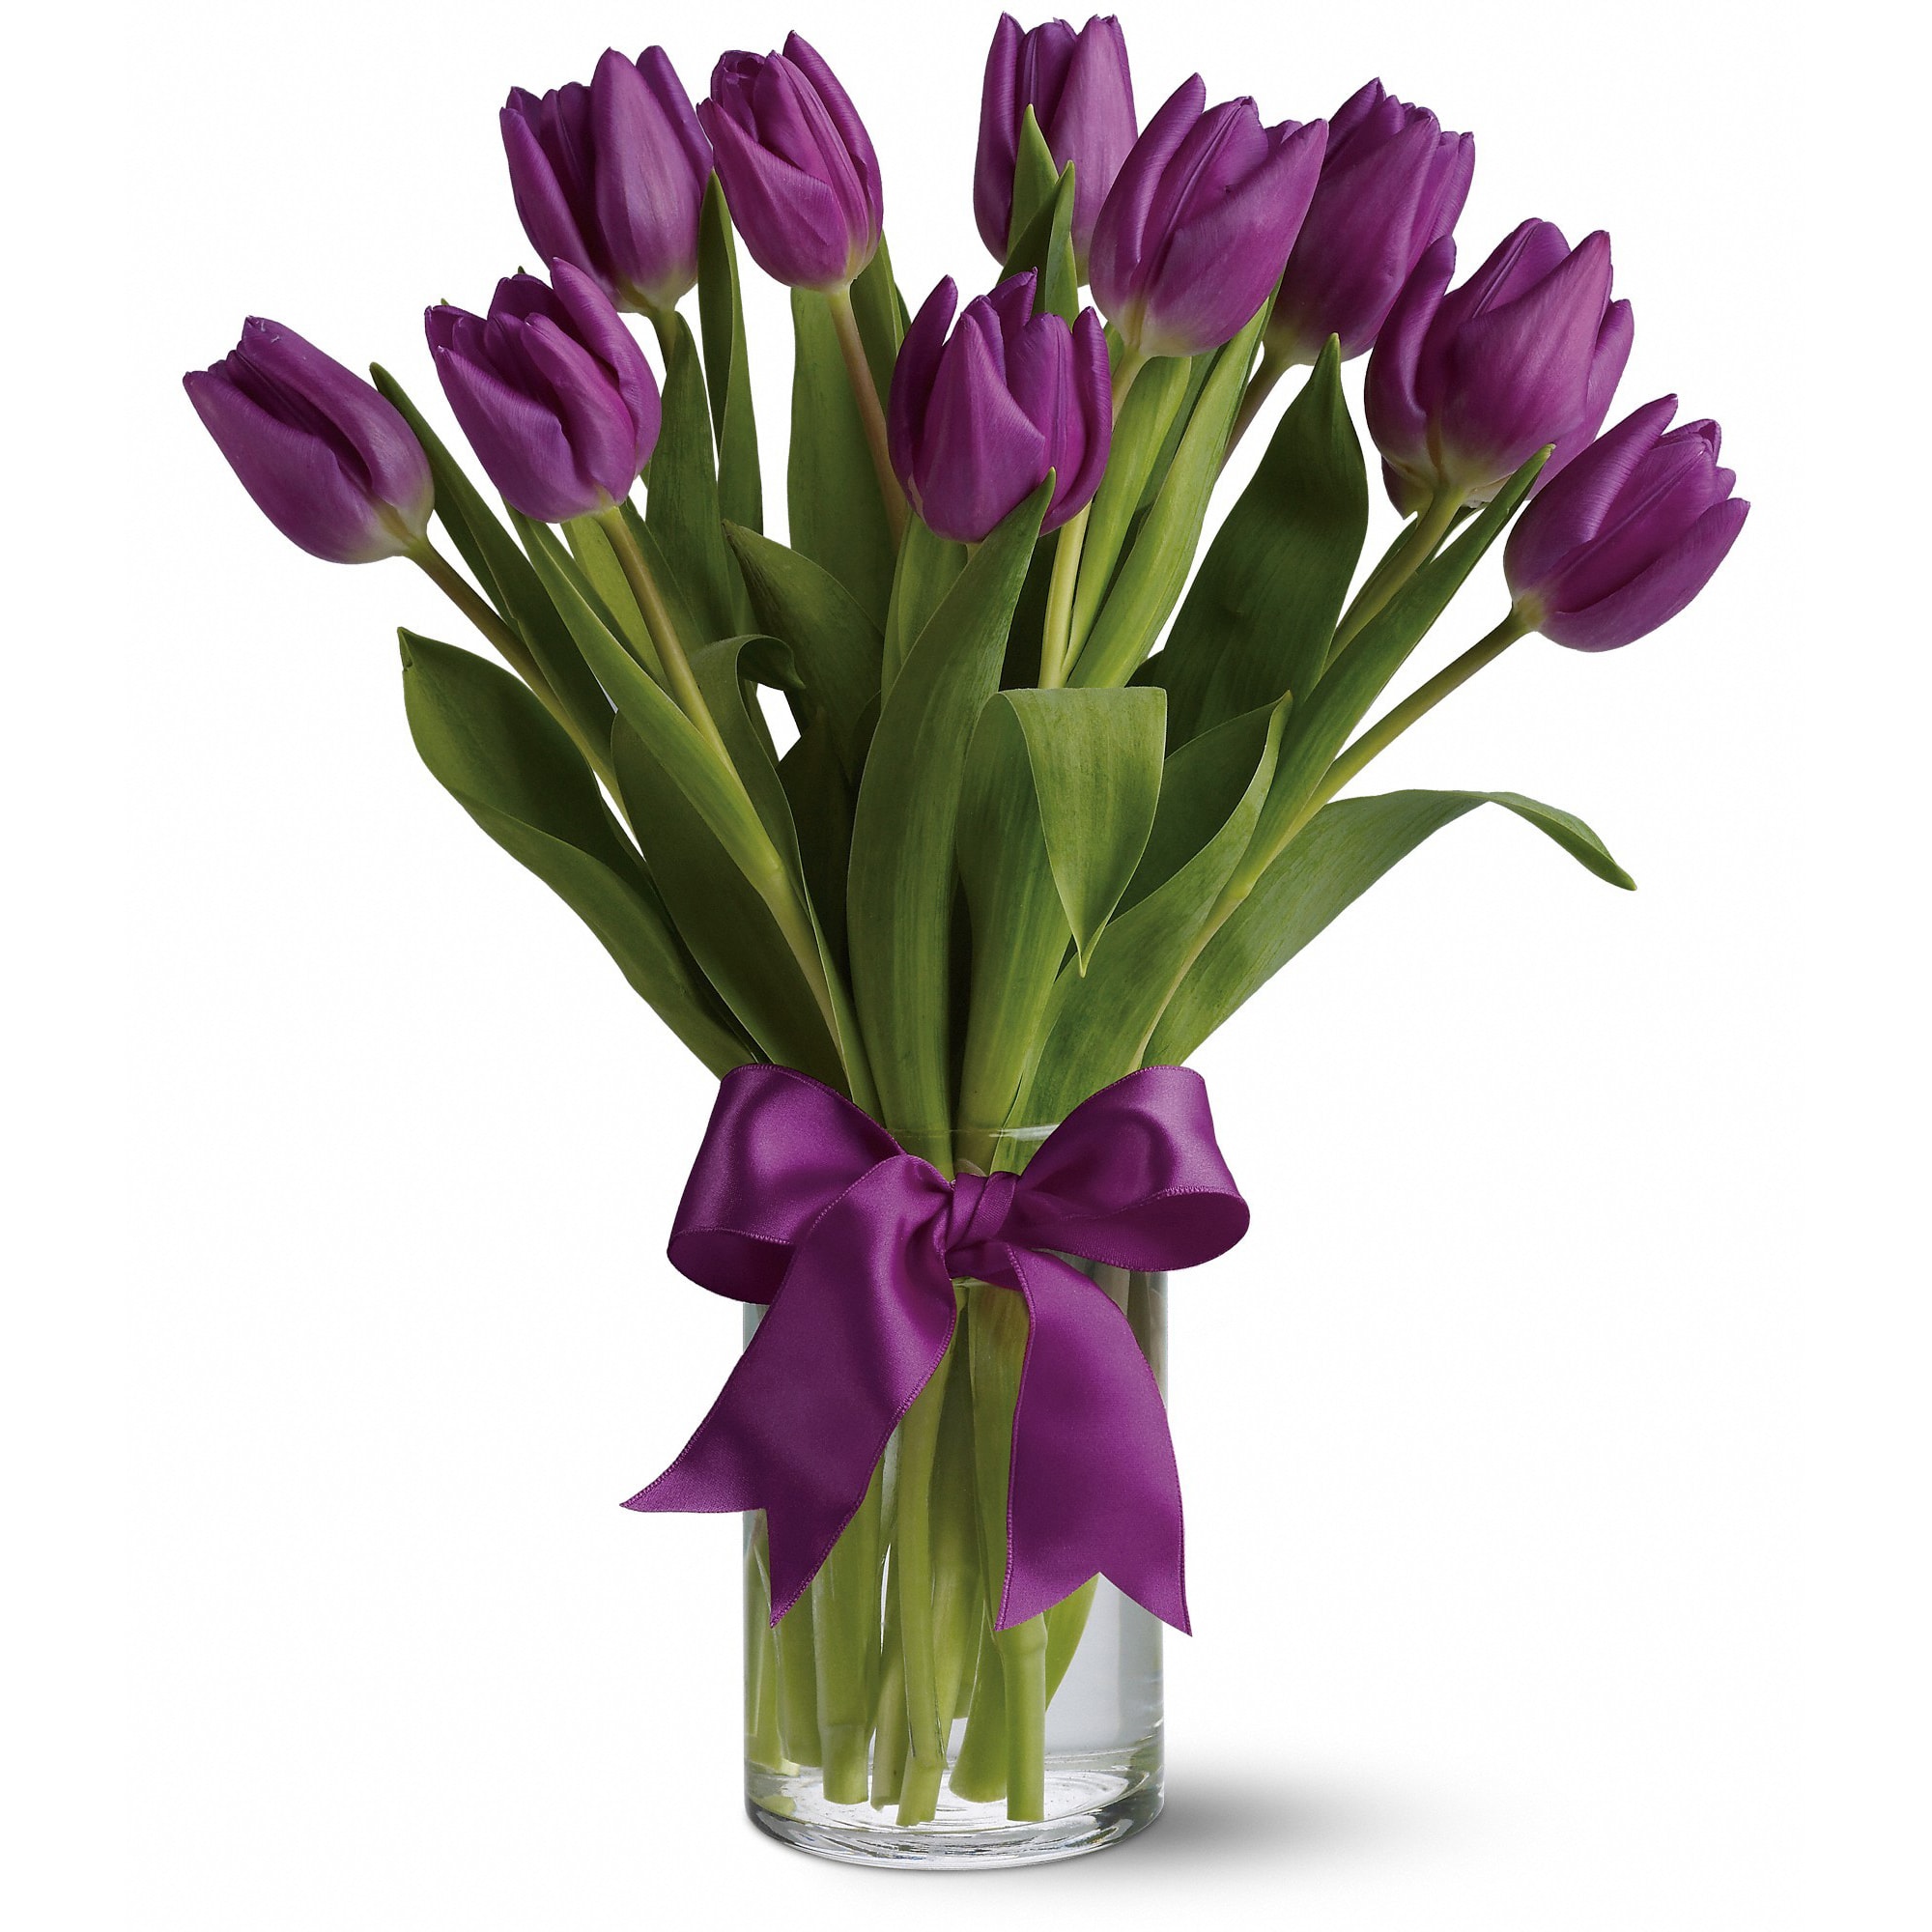 Passionate Purple Tulips - For anyone who's passionate about purple, this majestic arrangement of the prettiest purple tulips is, wellâ¦perfect    Spring's loveliest and most vibrant purple tulips are delivered in a special vase that's wrapped up with a purple satin ribbon.    Approximately 12 1/2&quot; W x 14 3/4&quot; H    Orientation: All-Around    As Shown : T148-2A  Deluxe : T148-2B  Premium : T148-2C